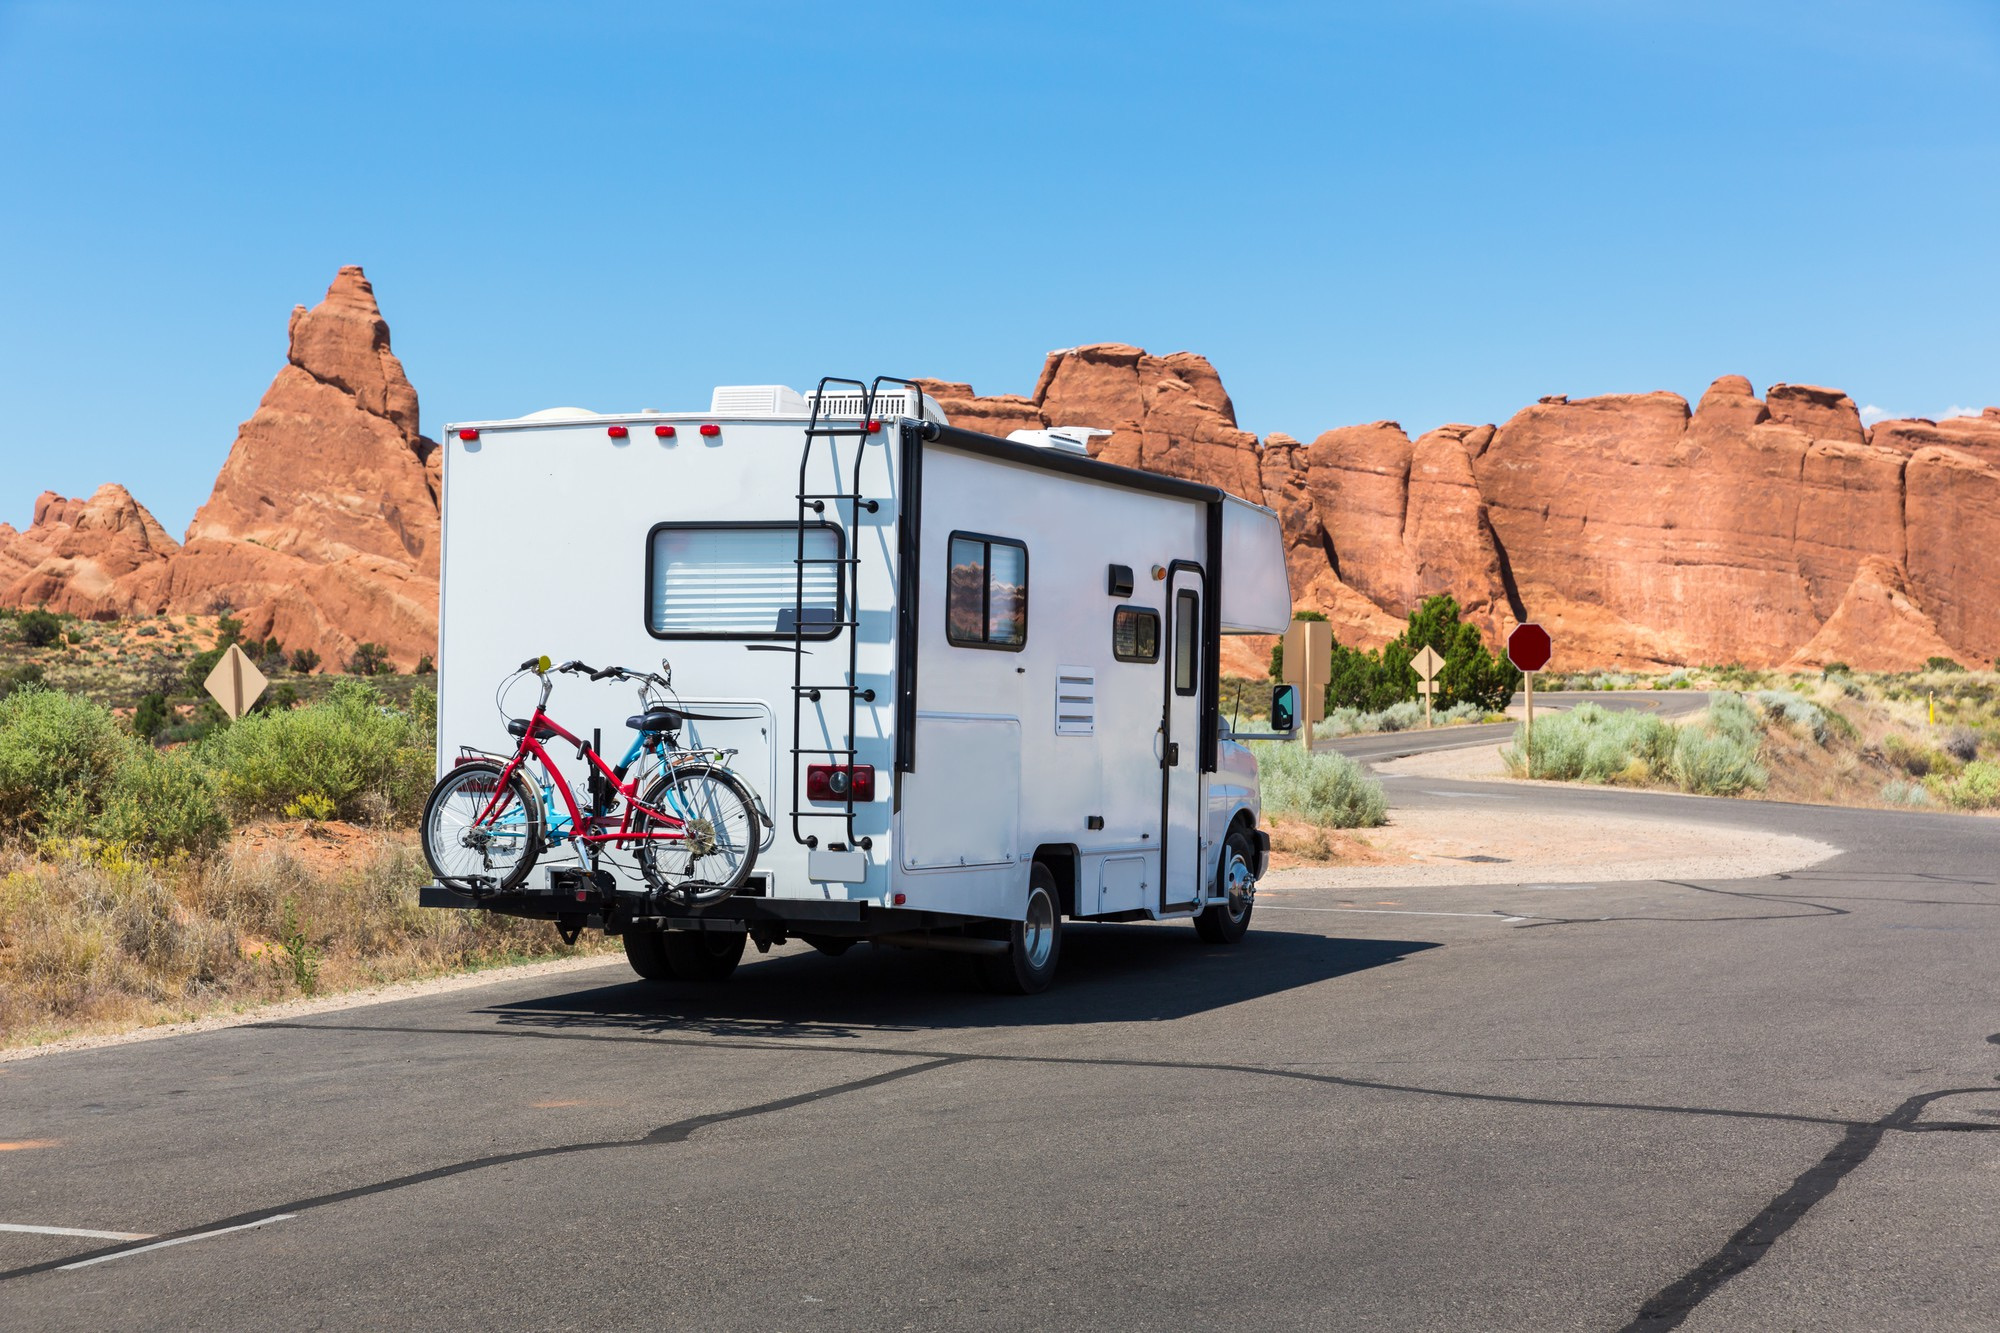 camper-with-bikes-asphalt-road-rocky-mountains-background 2